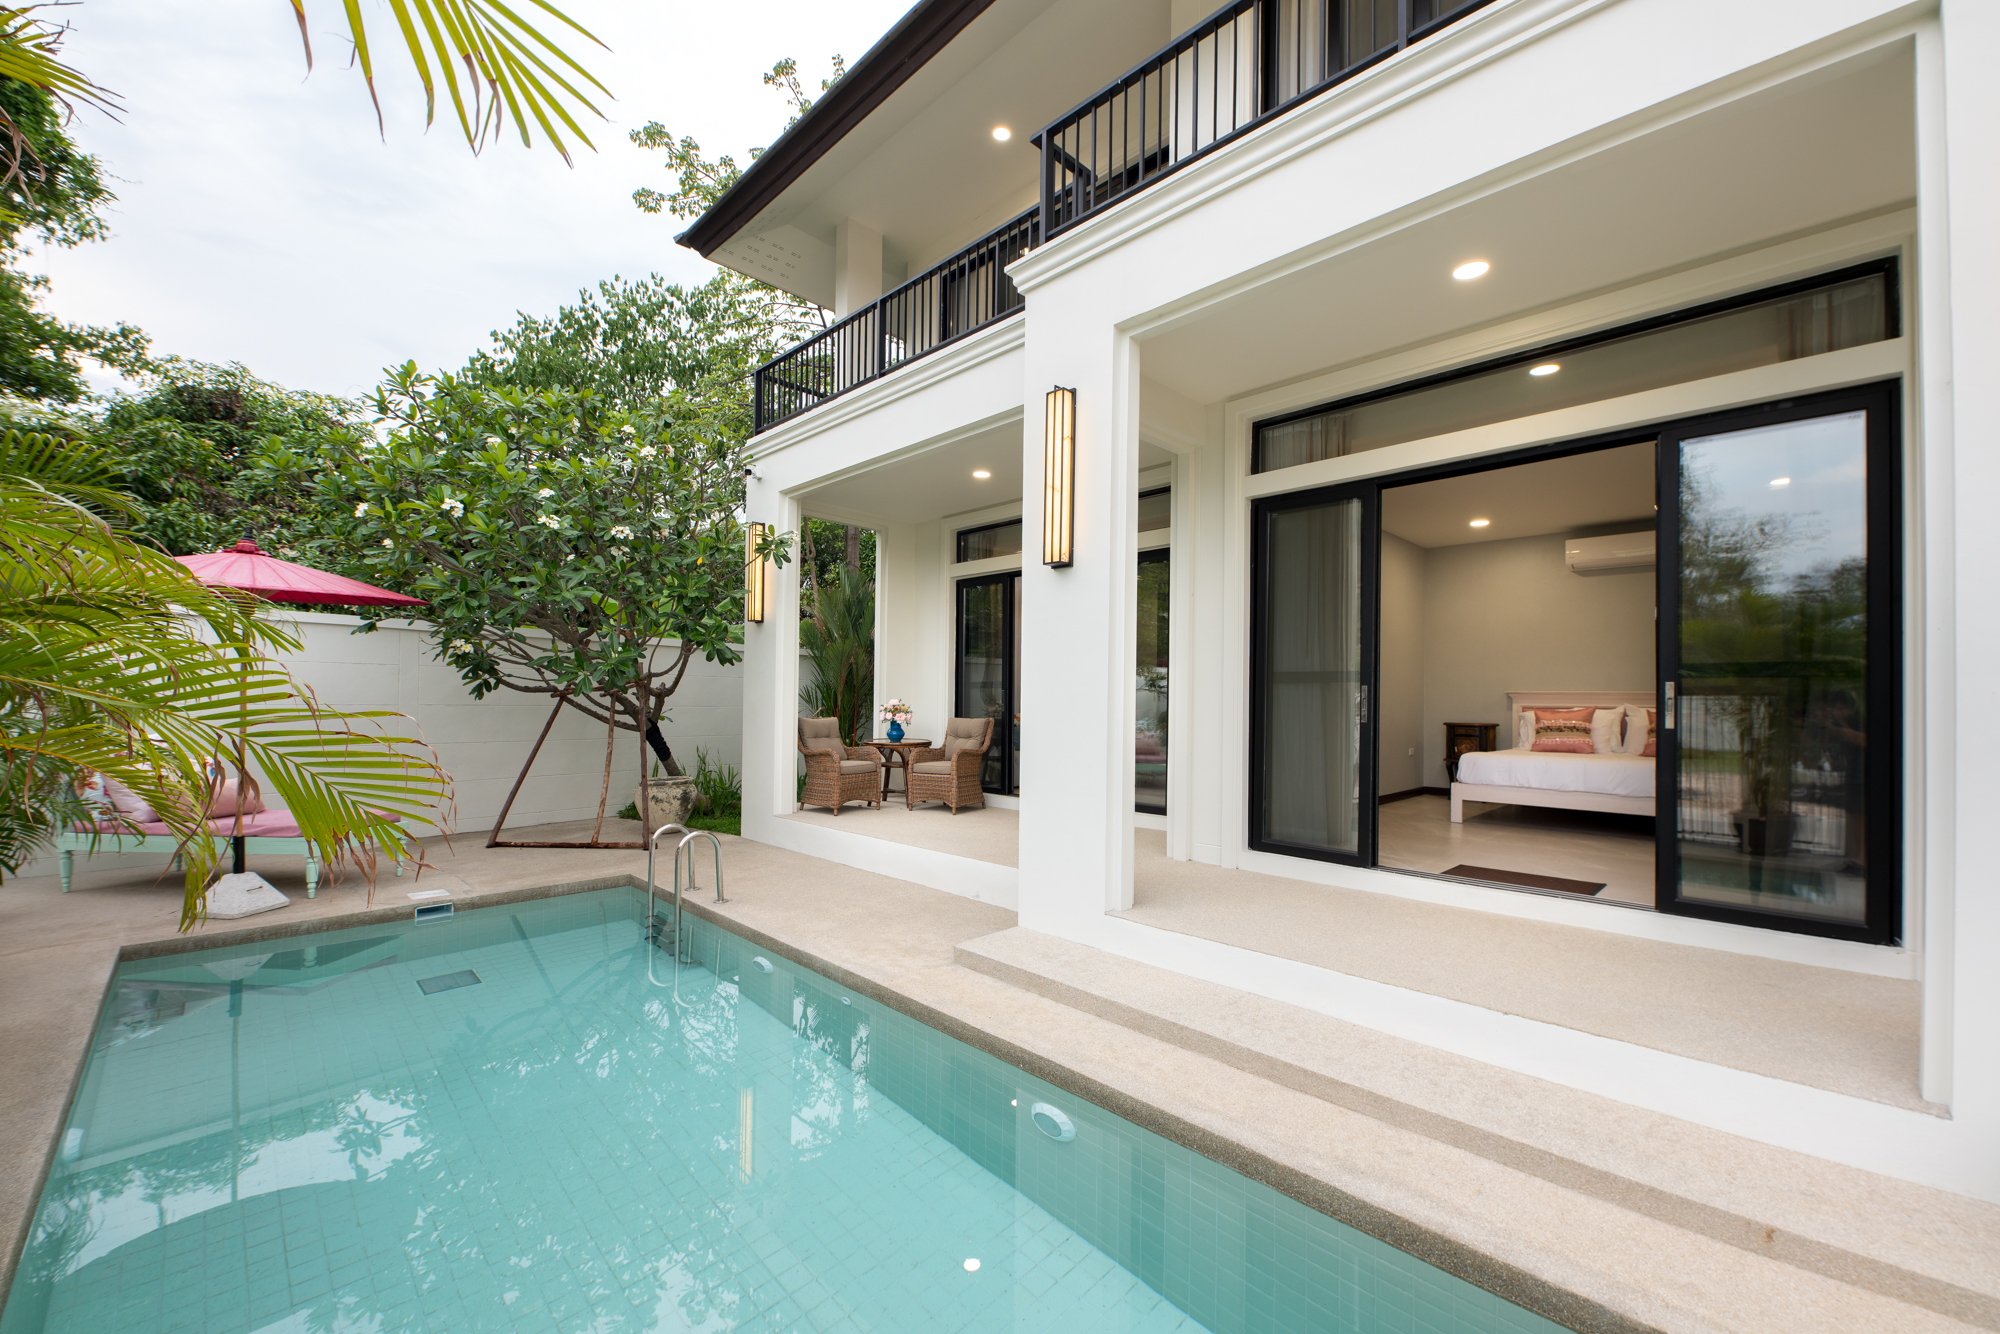 4-Bedroom Villa with a Private Pool in the Peaceful Chiang Mai